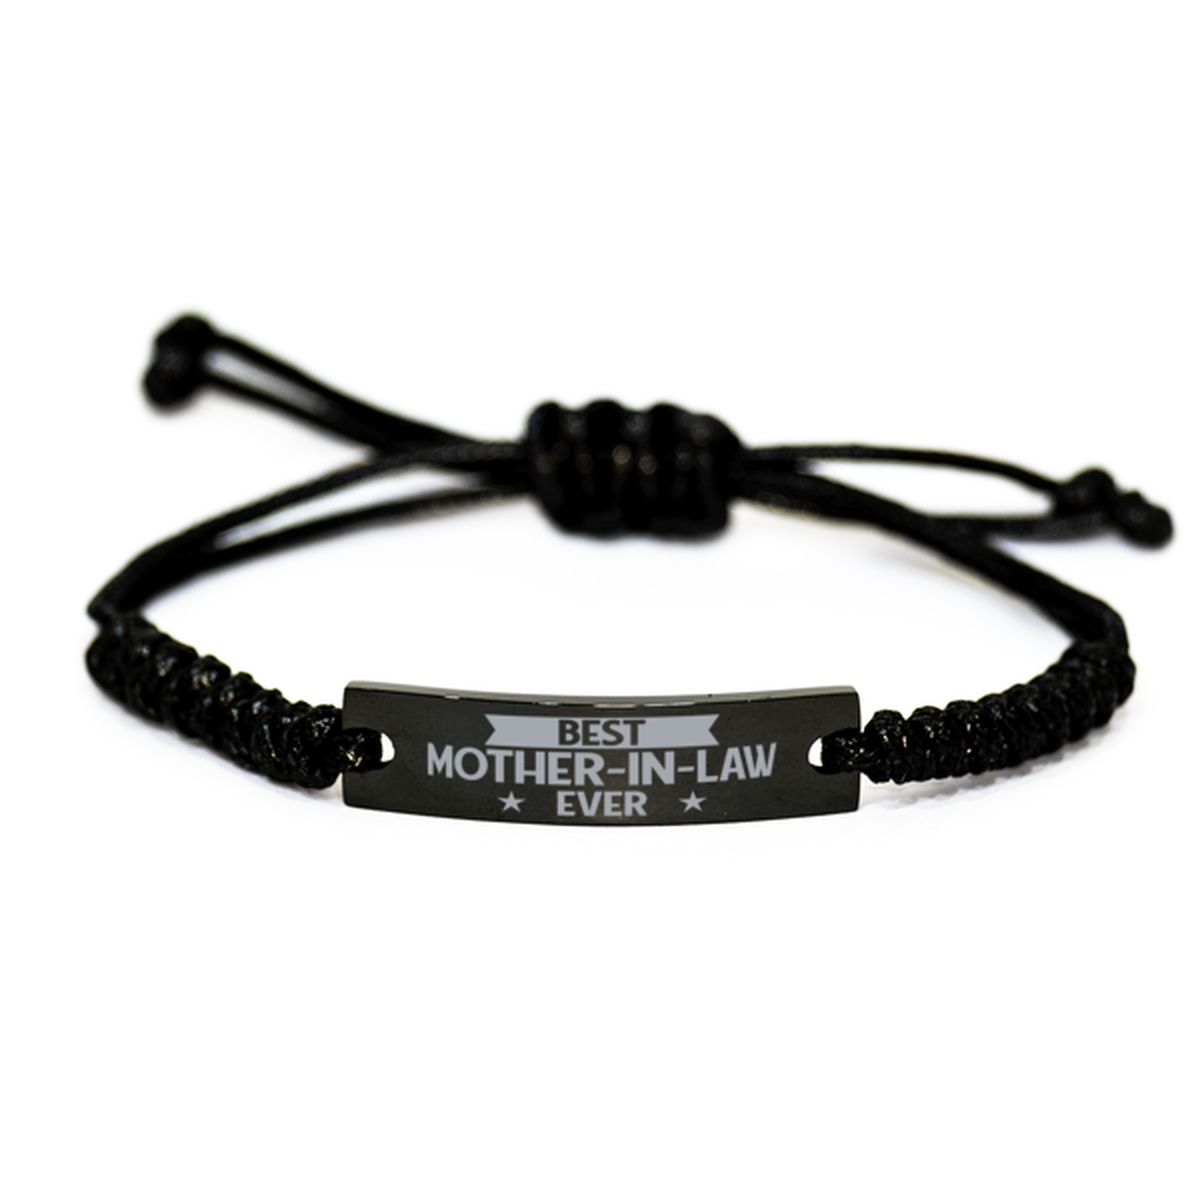 Best Mother-in-law Ever Mother-in-law Gifts, Funny Engraved Rope Bracelet For Mother-in-law, Birthday Family Gifts For Women